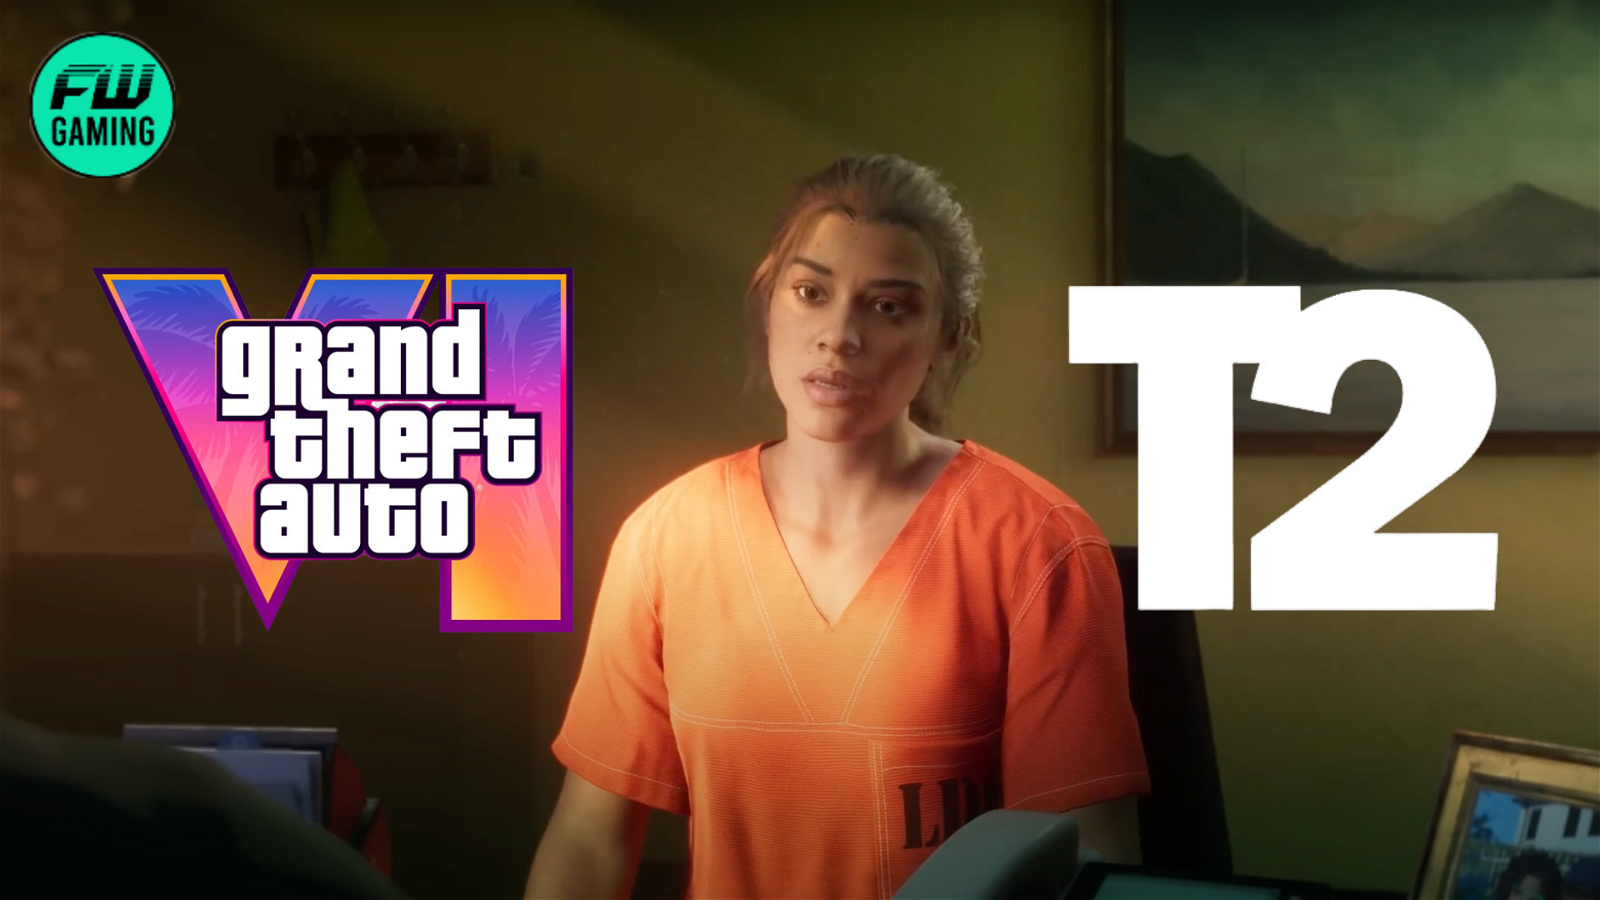 Take-Two CEO Couldn’t Care Less About GTA 6 Trailer Leaking Before Time as It Still “Broke the Internet”